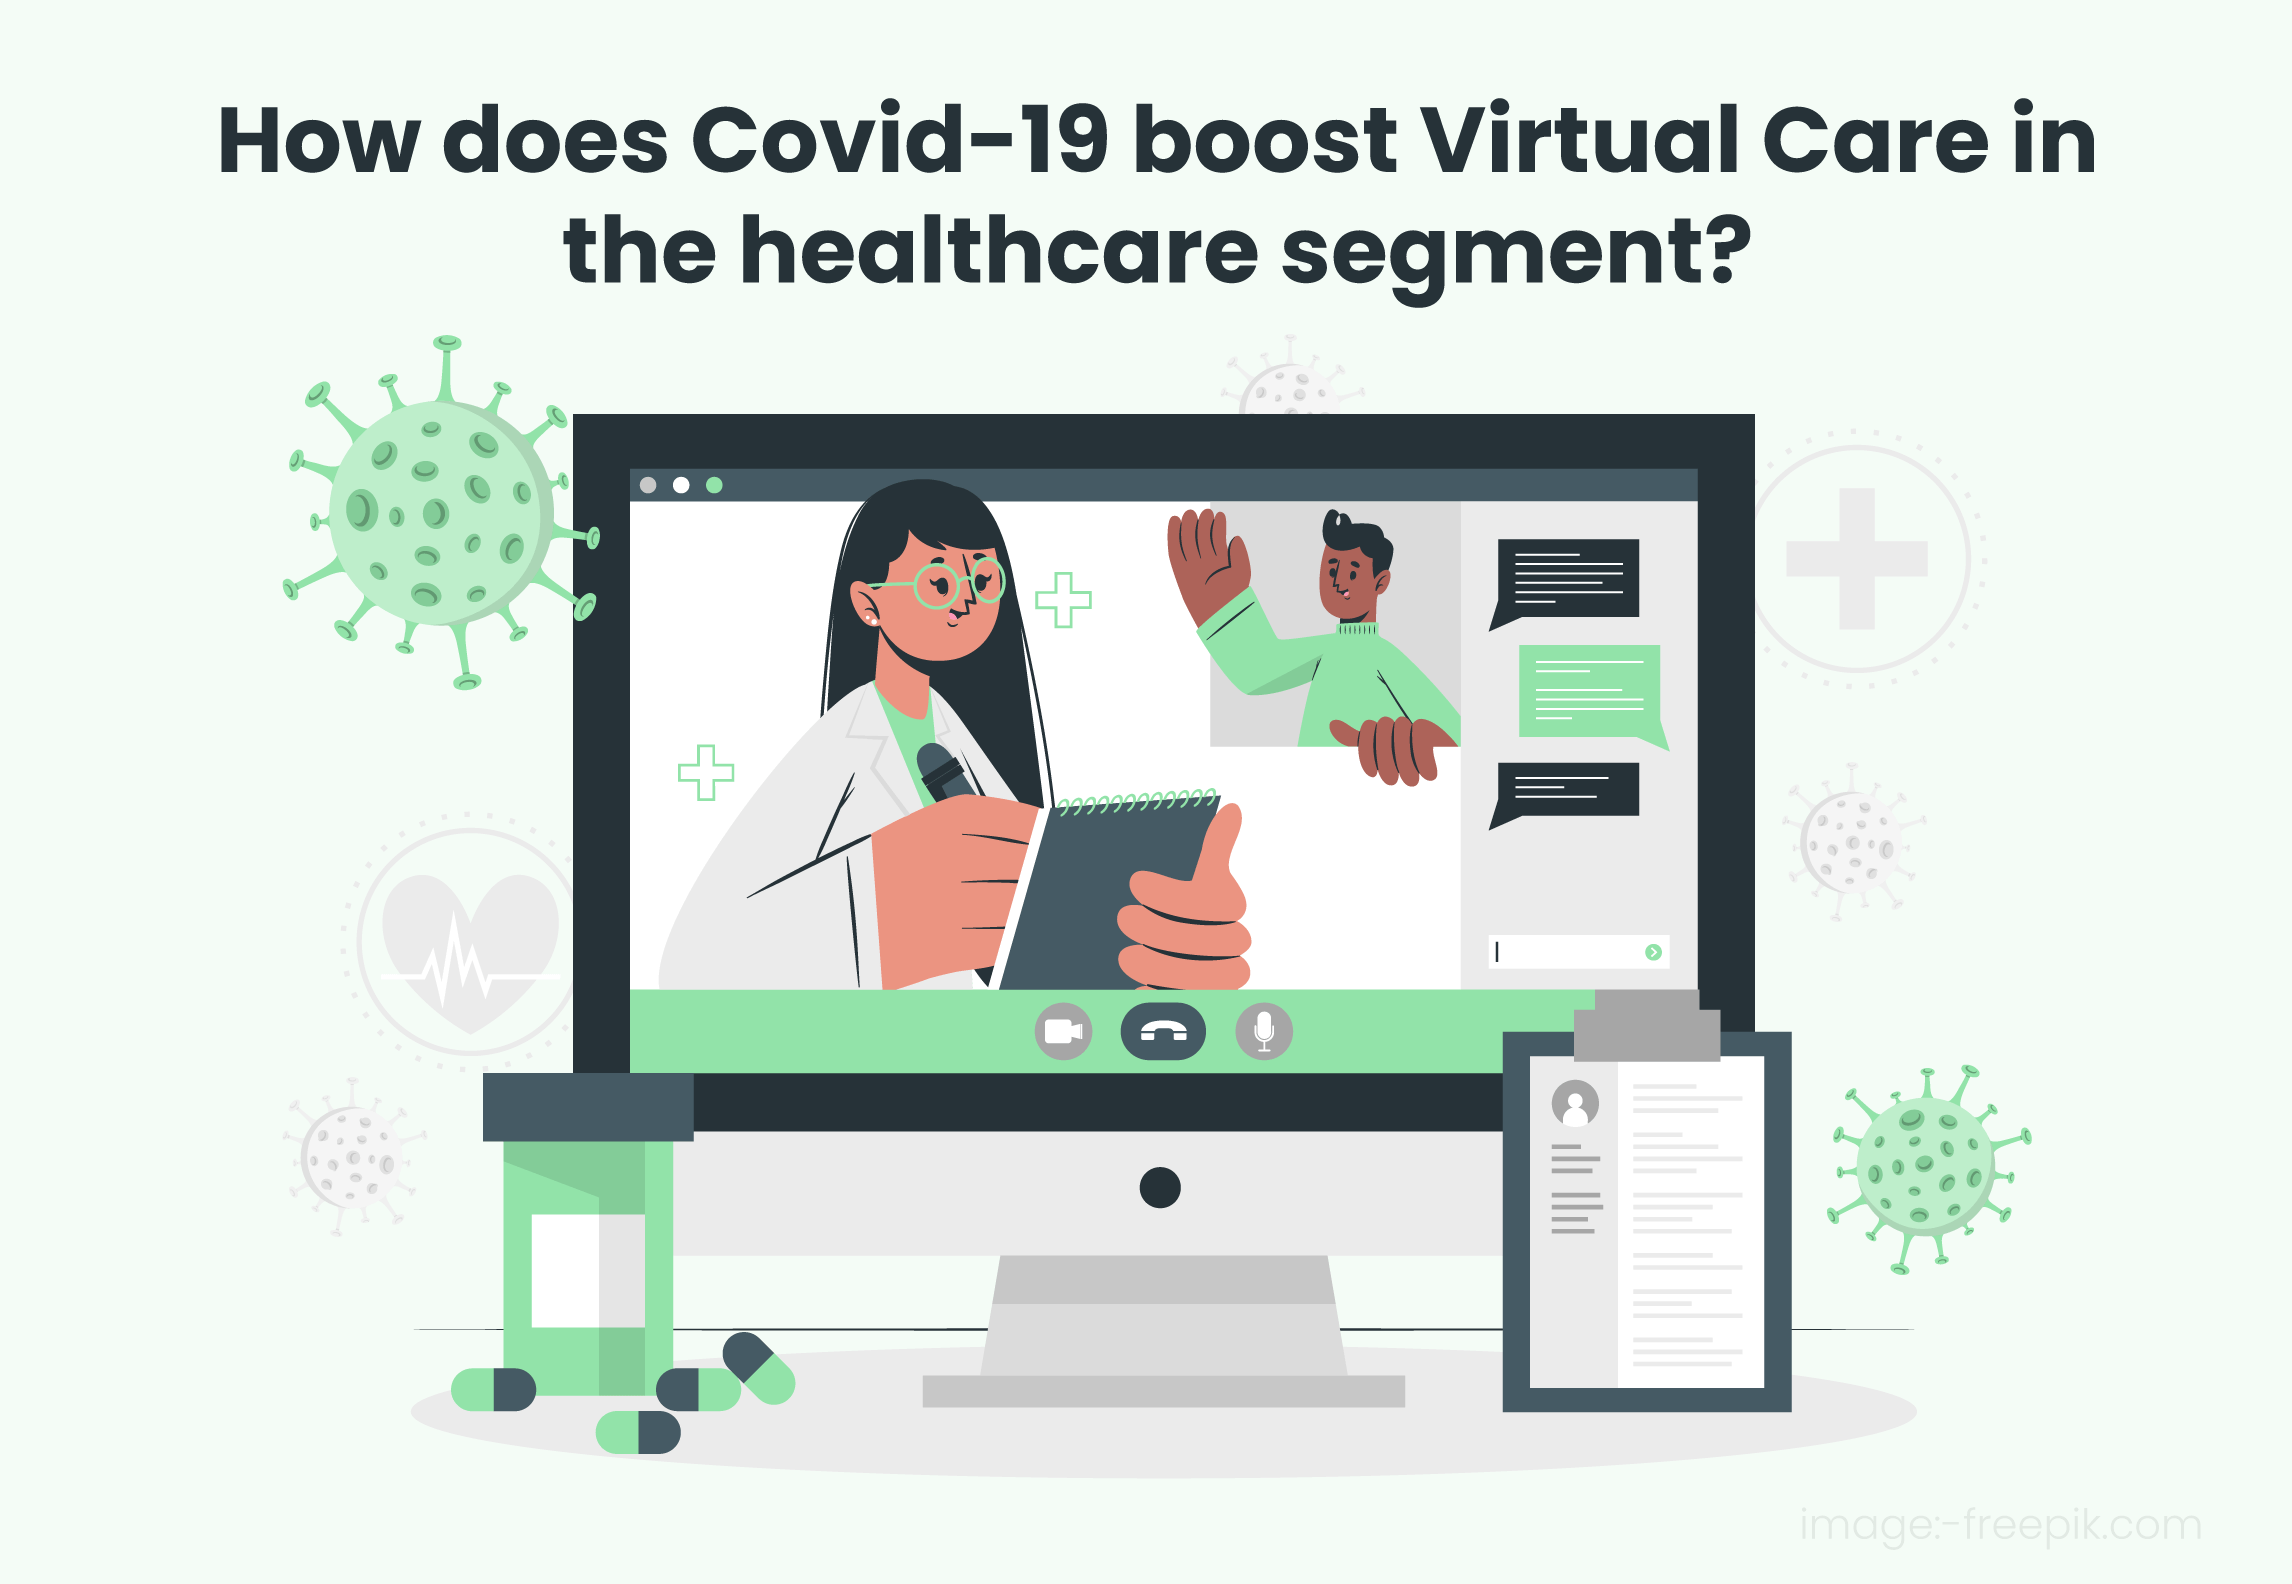 How does Covid-19 boost Virtual Care in the healthcare segment?